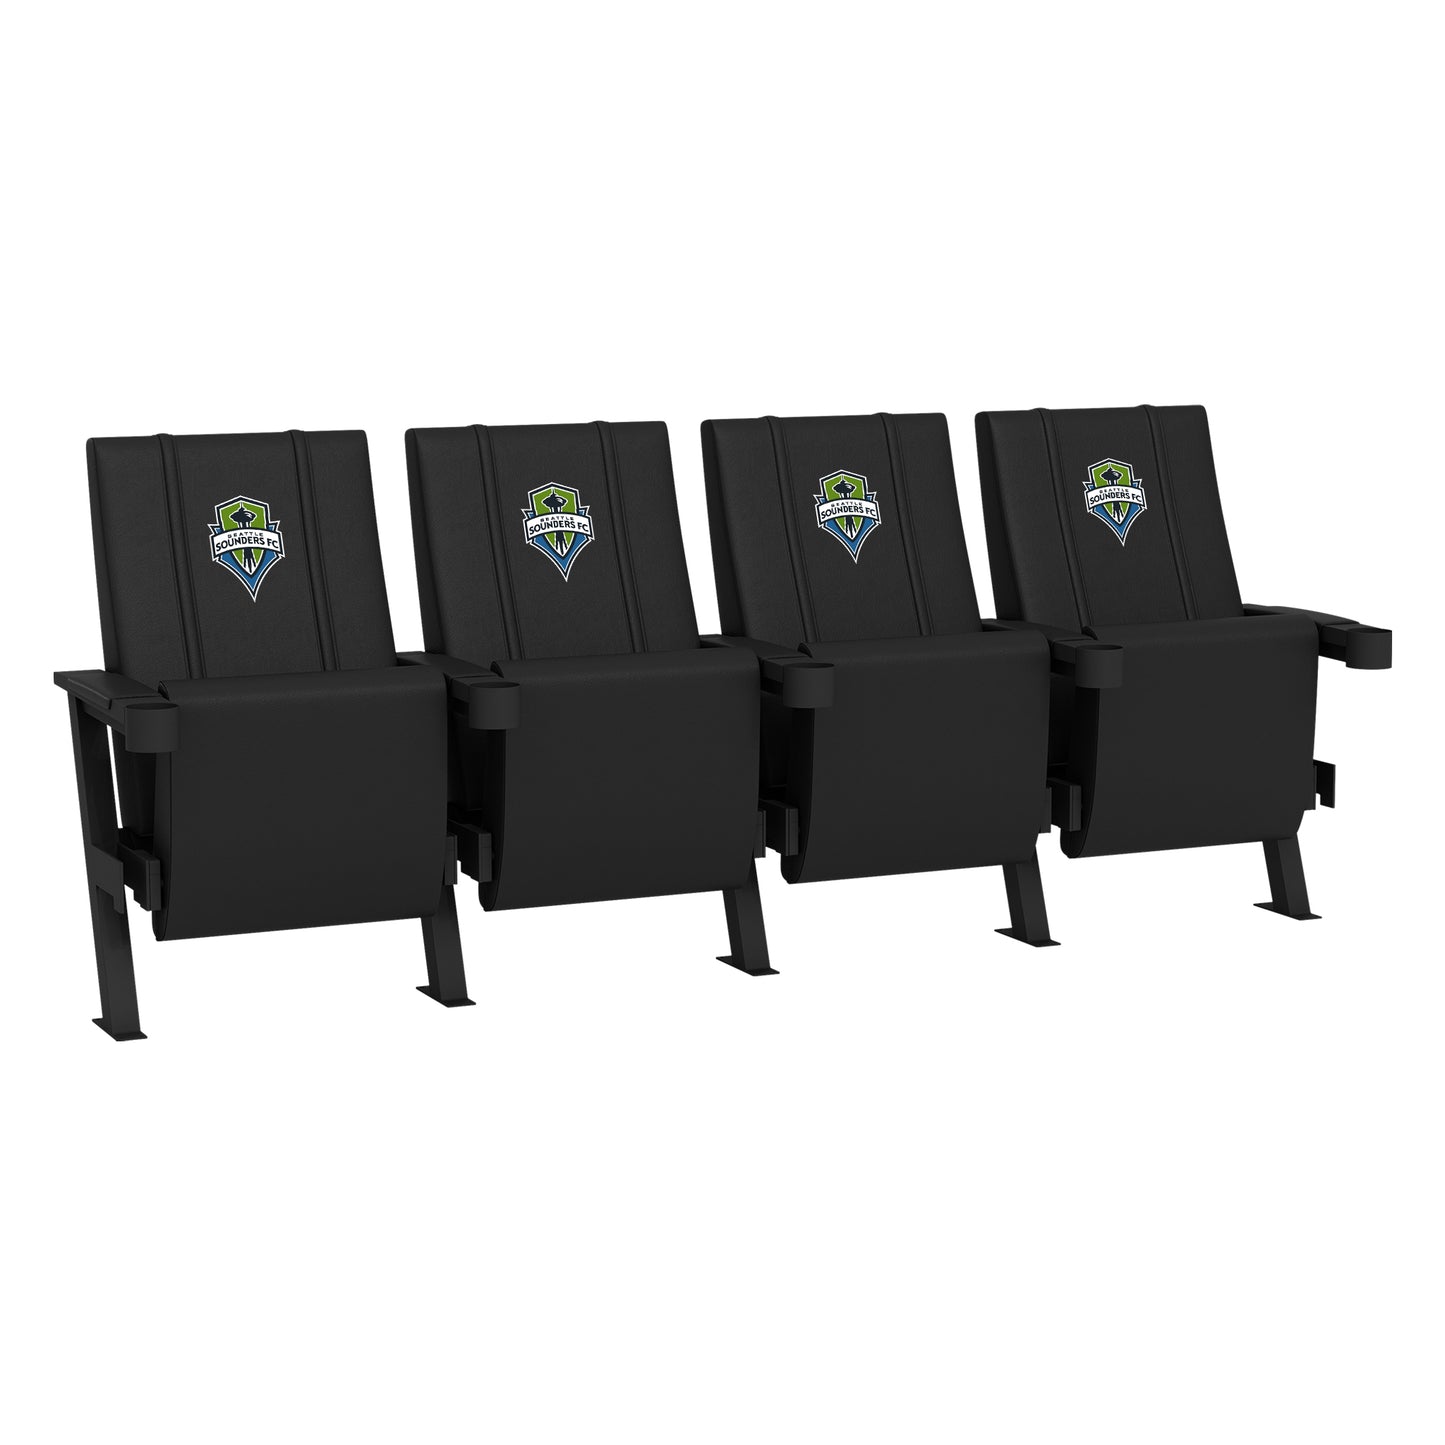 SuiteMax 3.5 VIP Seats with Seattle Sounders Logo